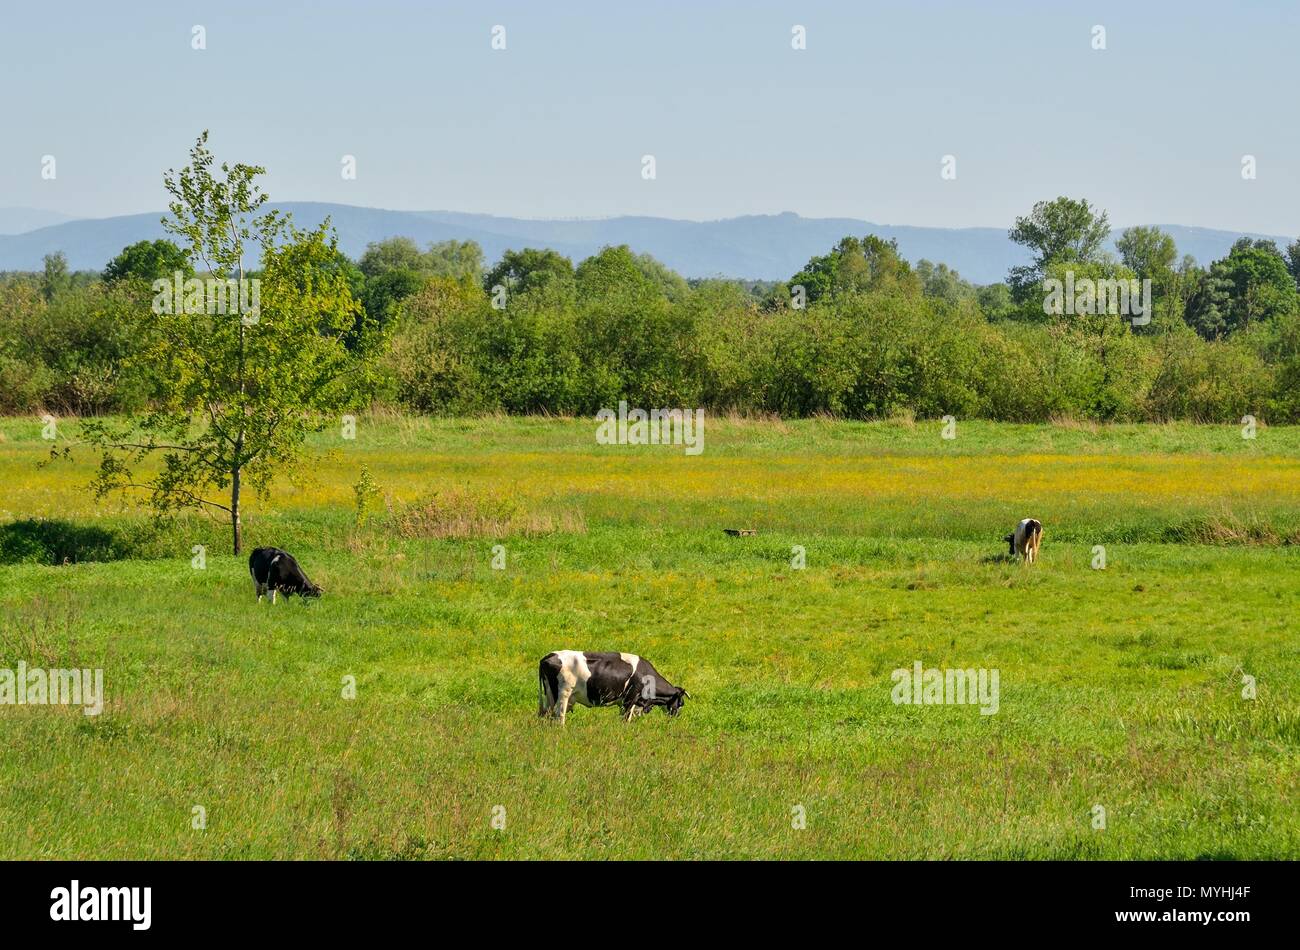 Beautiful rural landscape. Cows grazing on a green meadow. Stock Photo